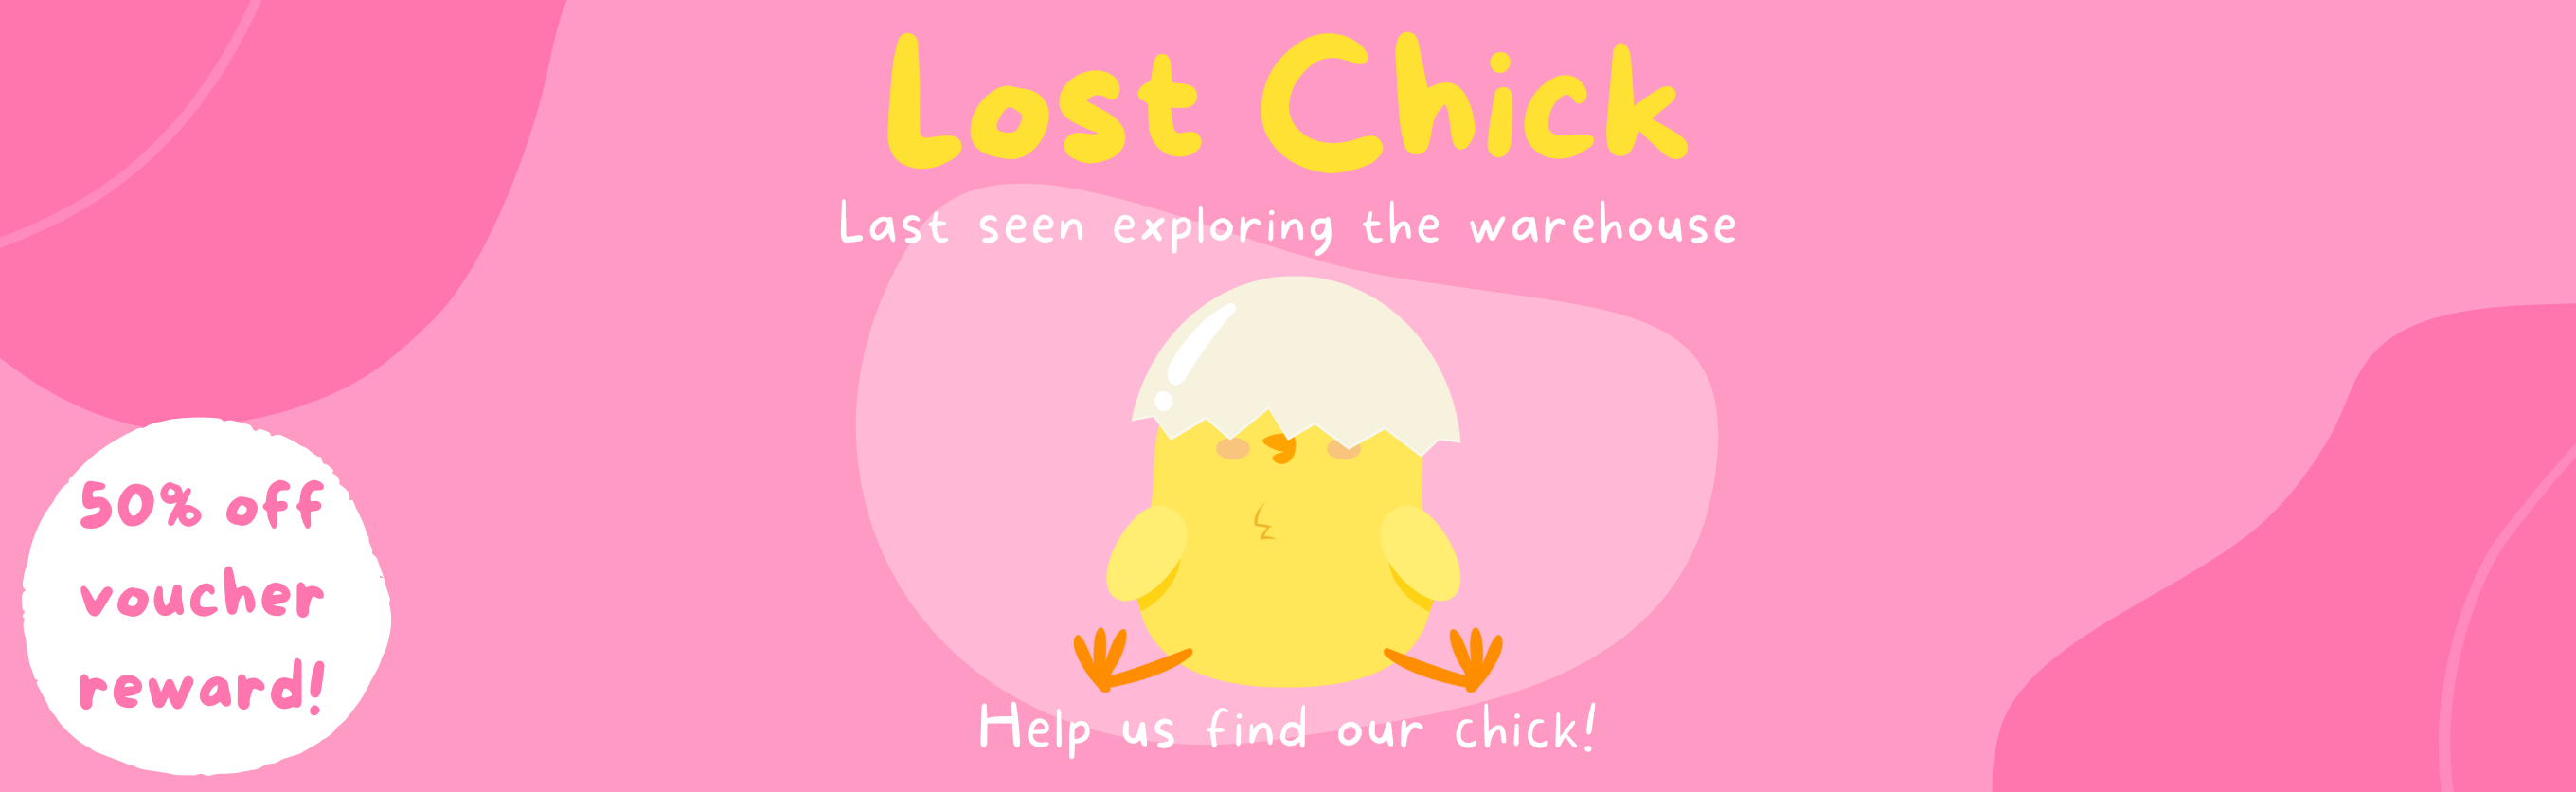 Help Us Find Our Lost Chicks and Get 50% Off!